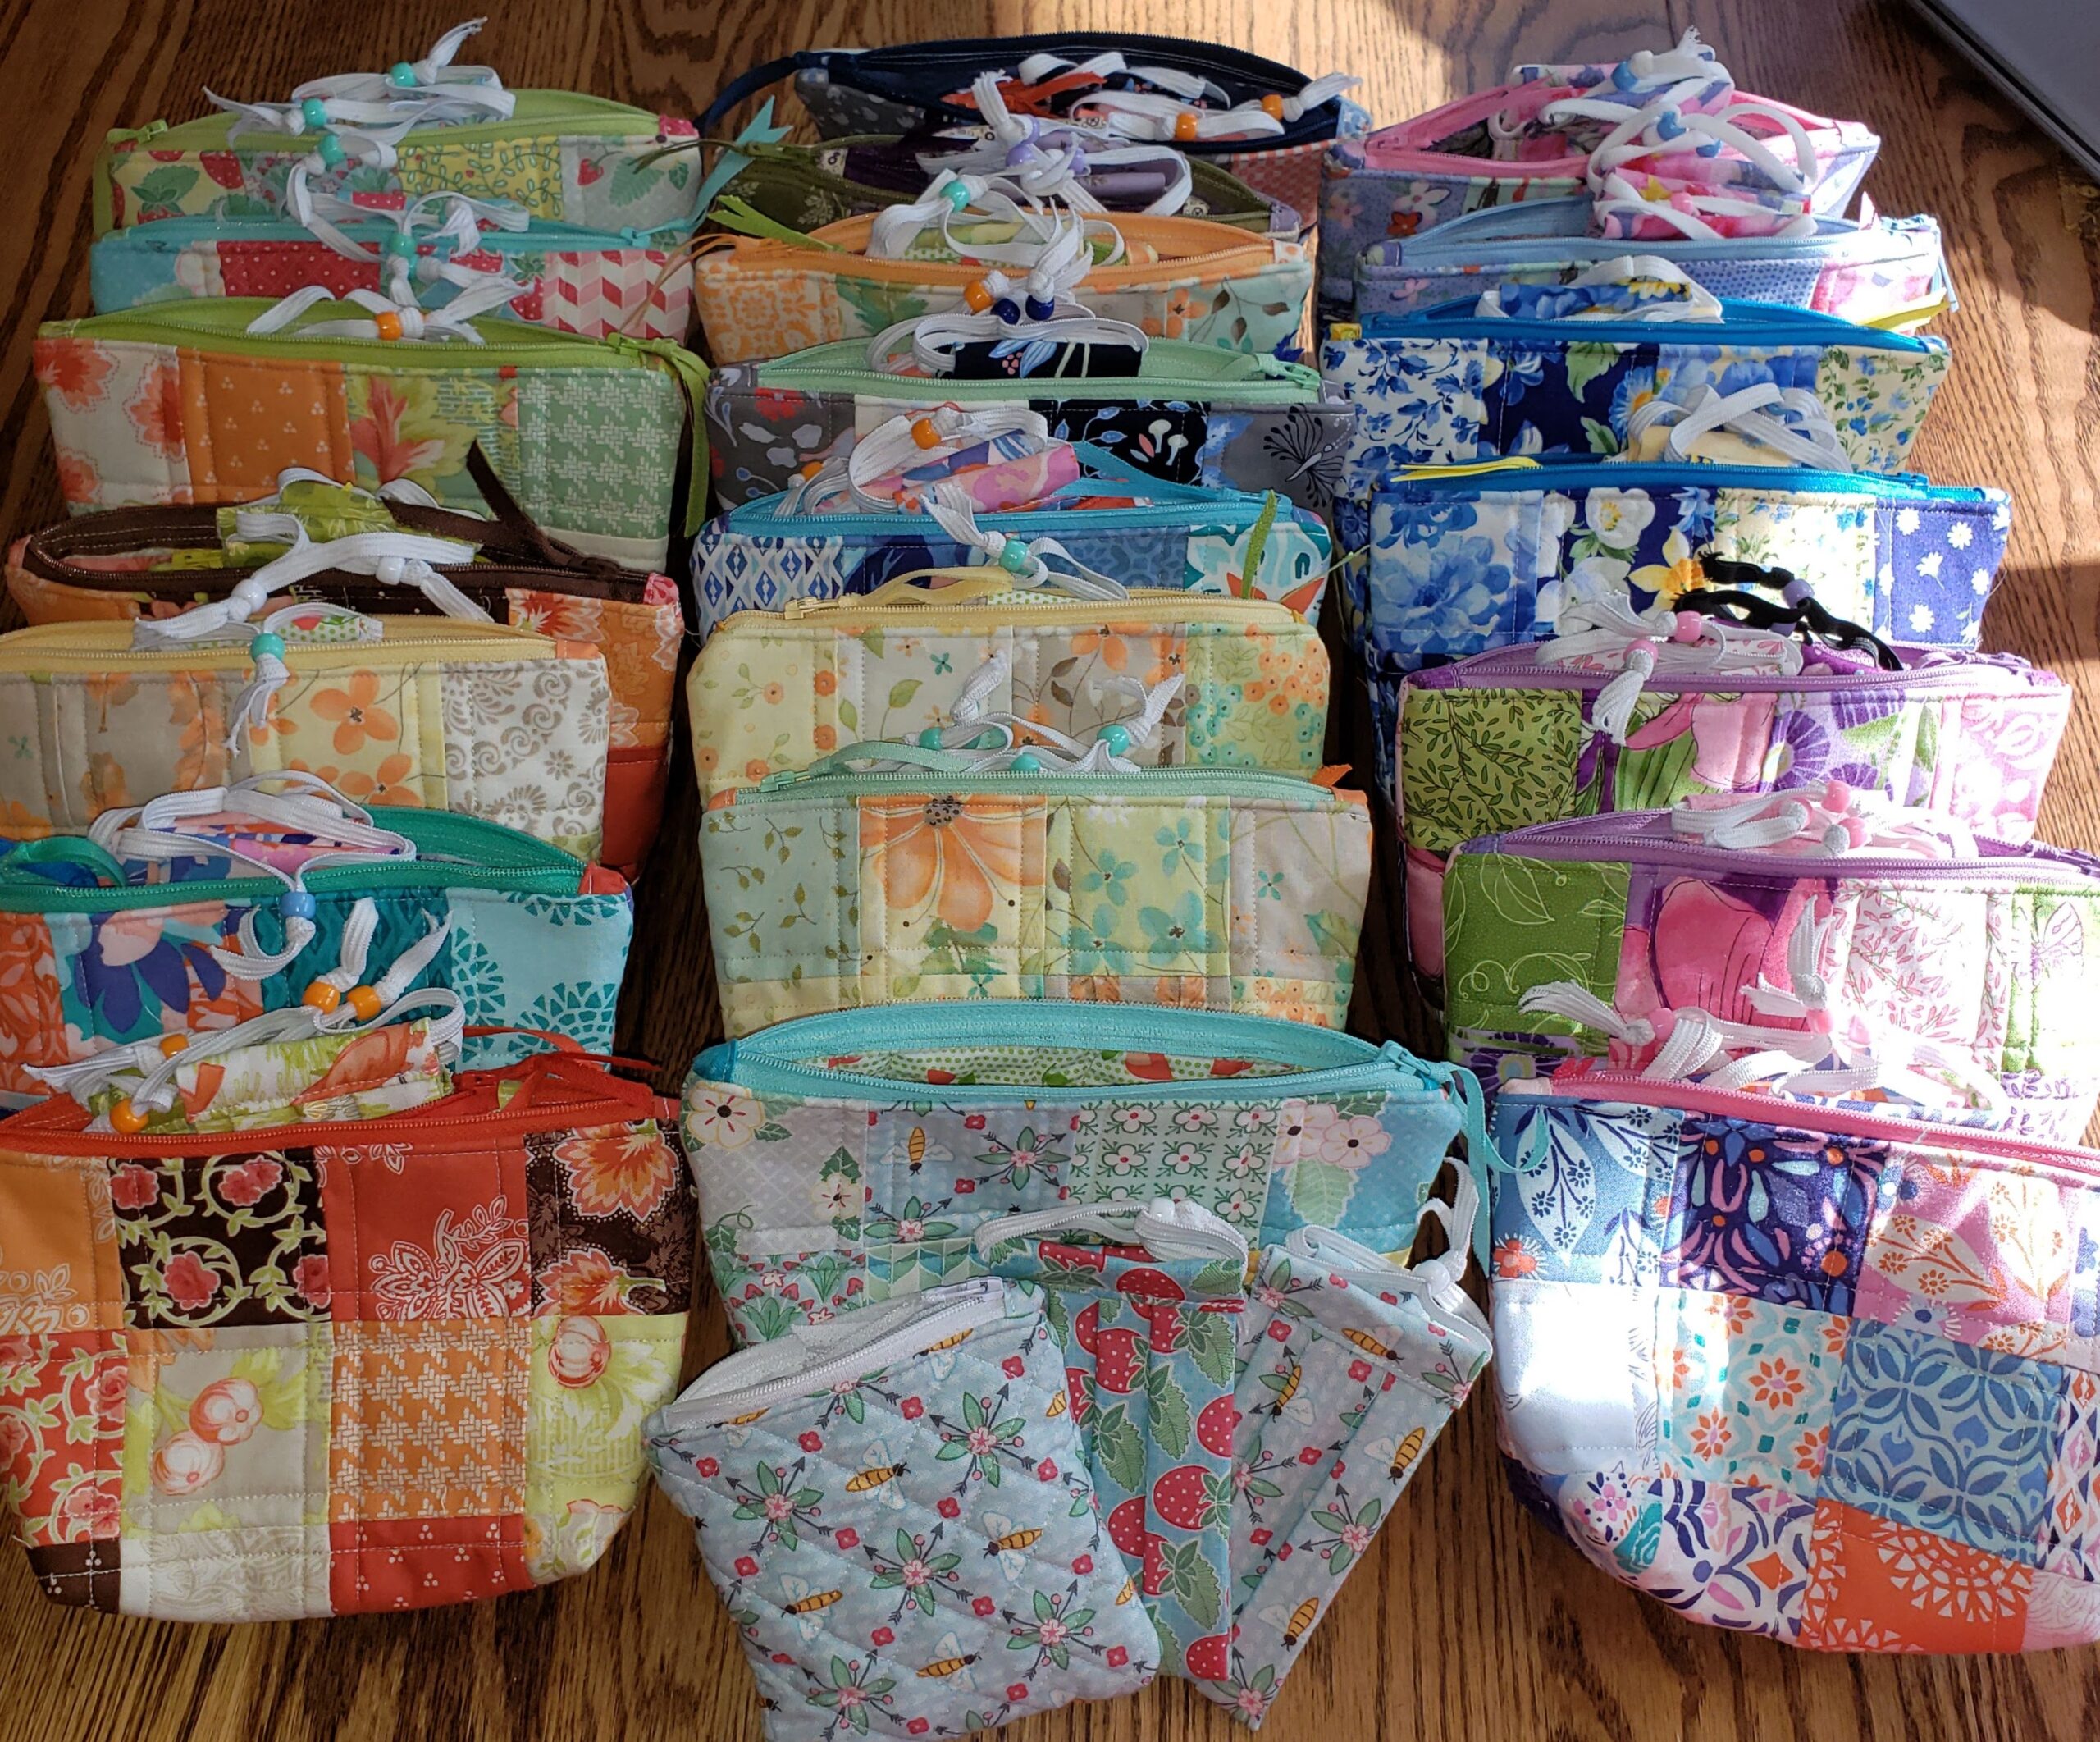 Zipper bags with smaller bags and masks.